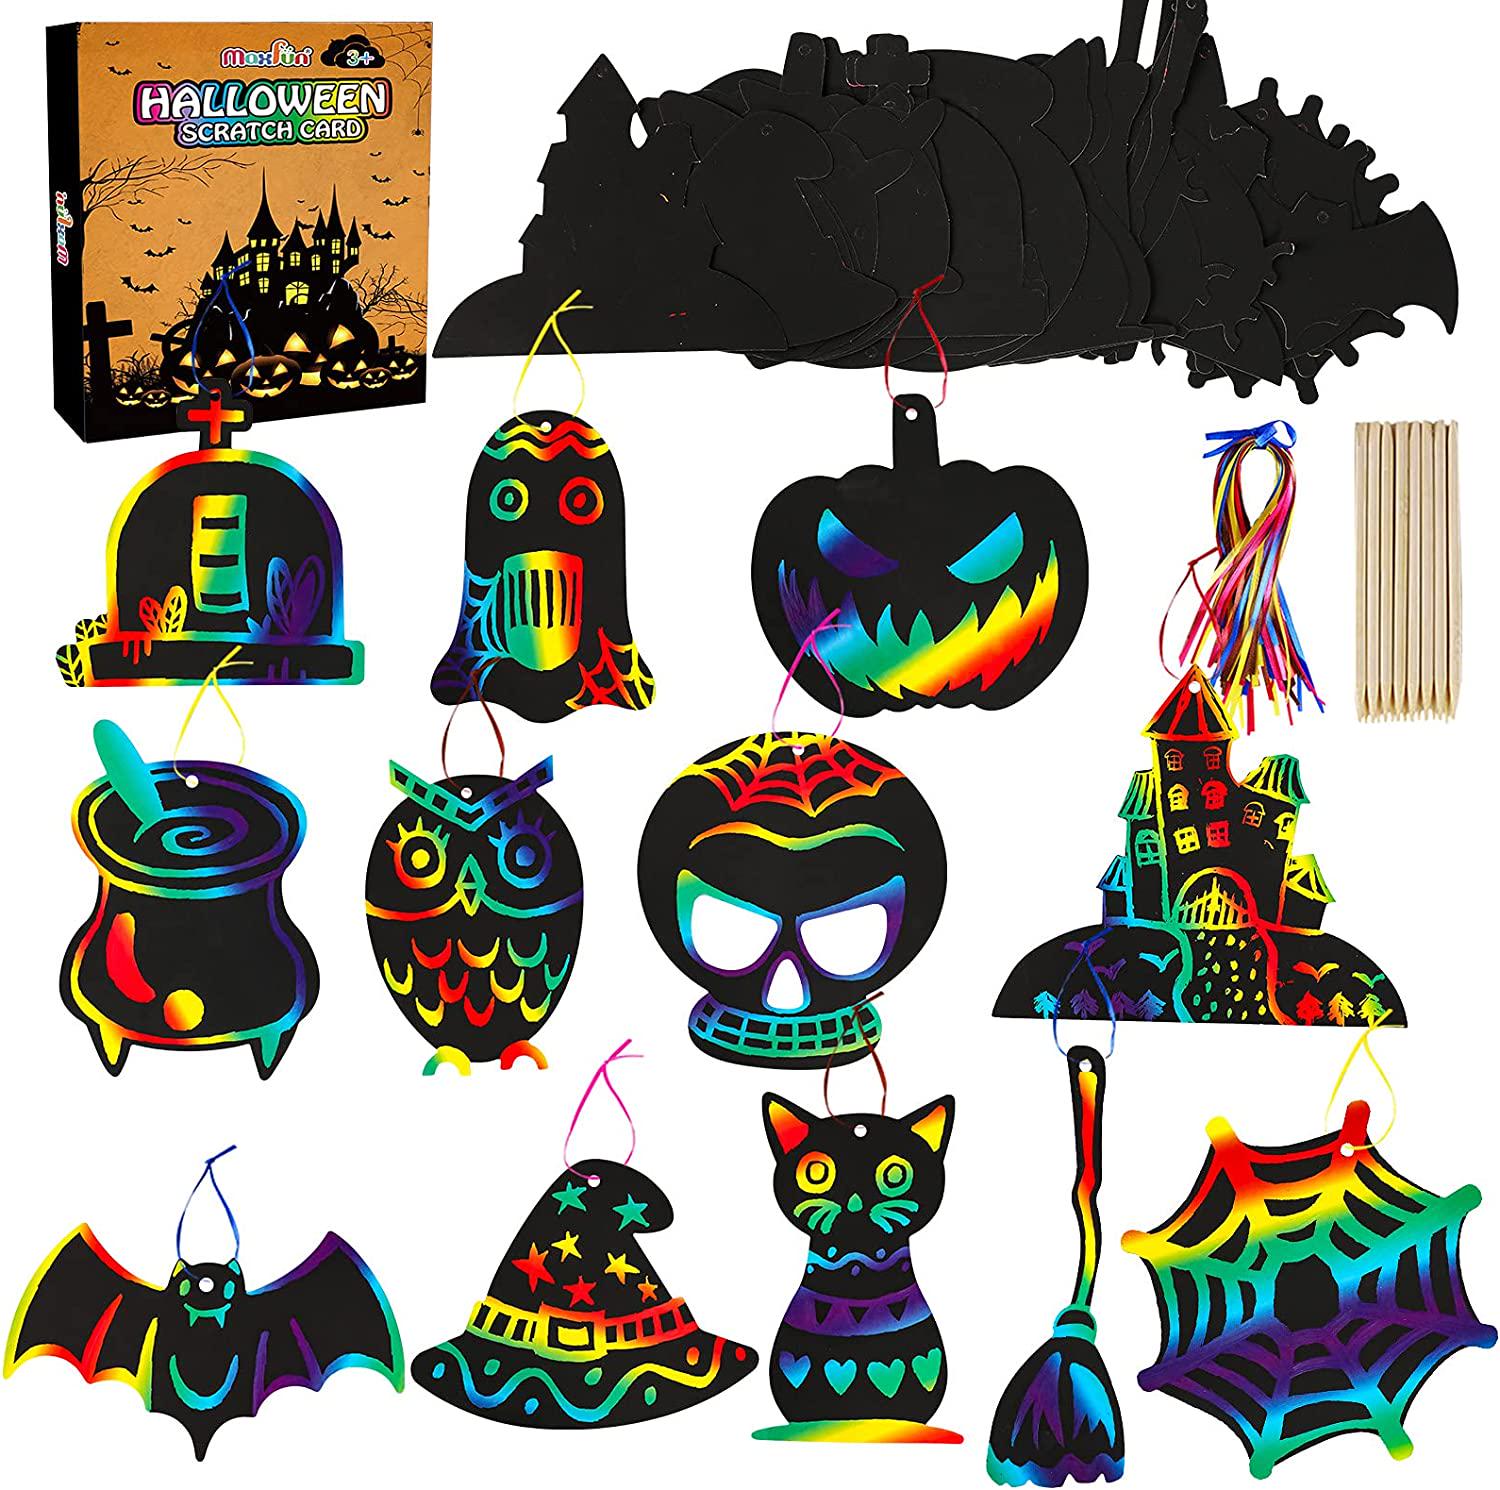 Max Fun, Max Fun Rainbow Color Scratch Halloween Ornaments (48 Counts) - Magic Scratch Off Cards Paper Hanging Art Craft Supplies Educational Toys Kit with 24 PCS Wooden Stylus and Cords for Kids Party Favors